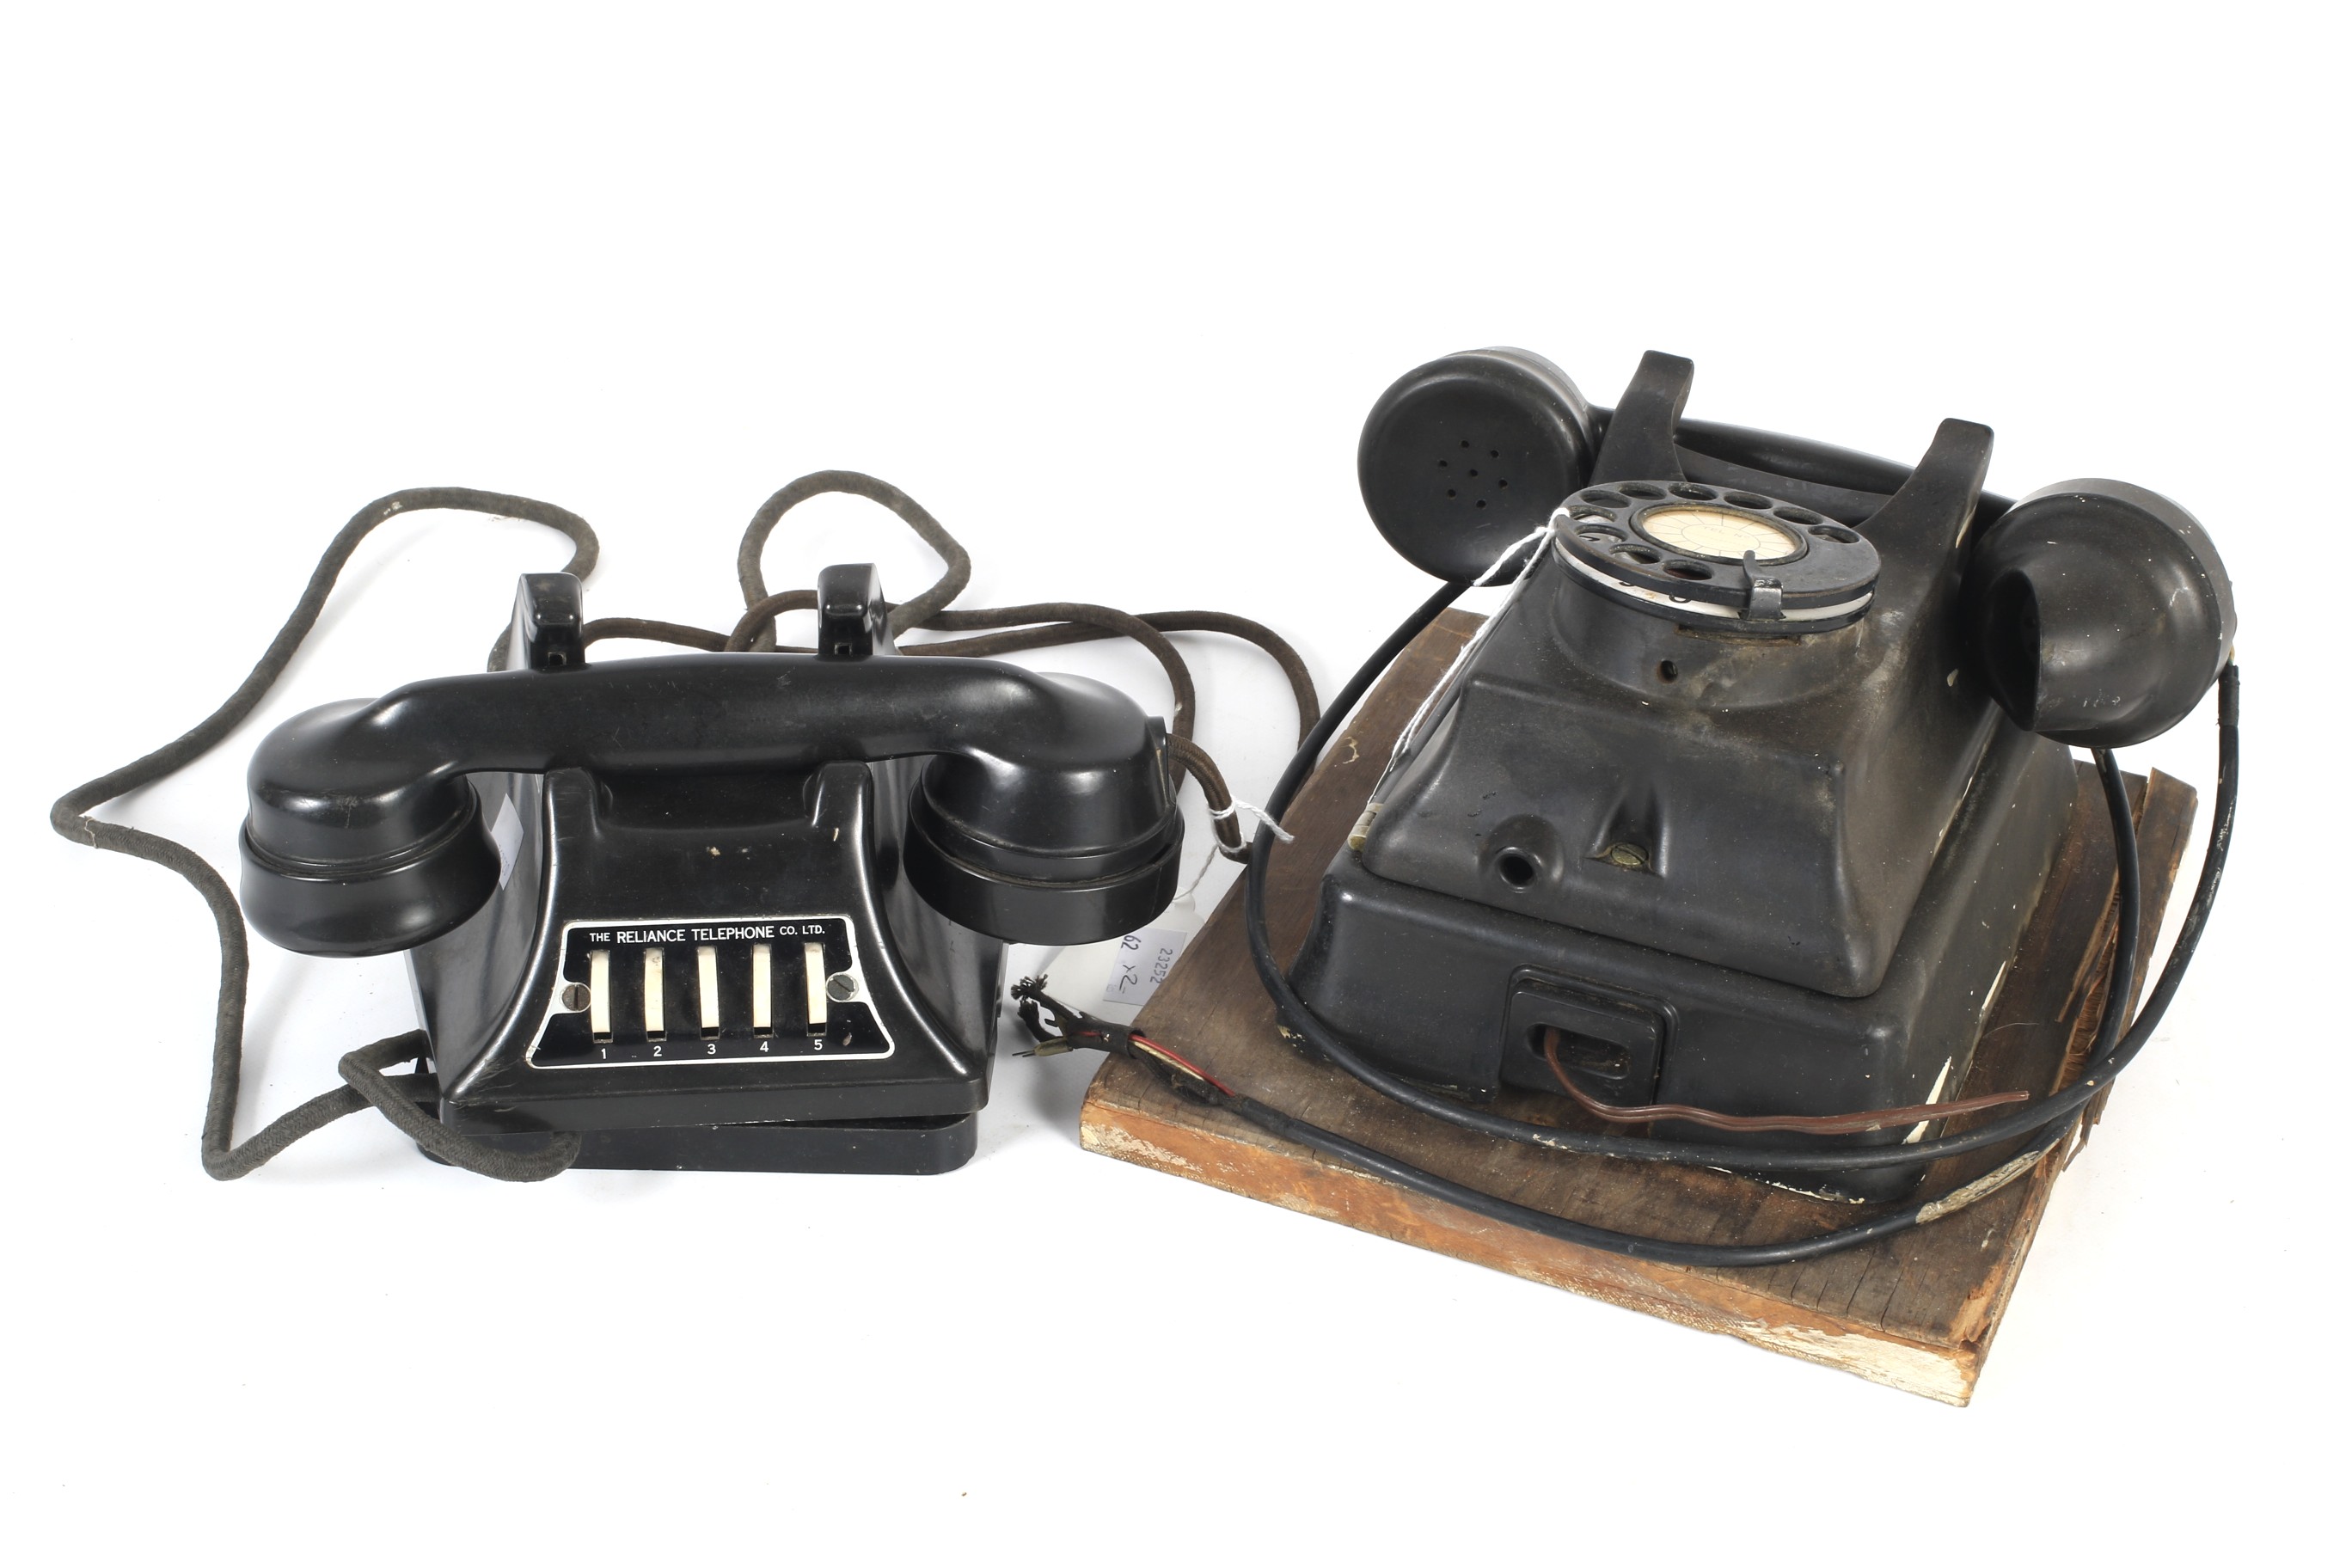 A circa 1940s black Bakelite GEC Reliance internal wall mounted telephone and another example